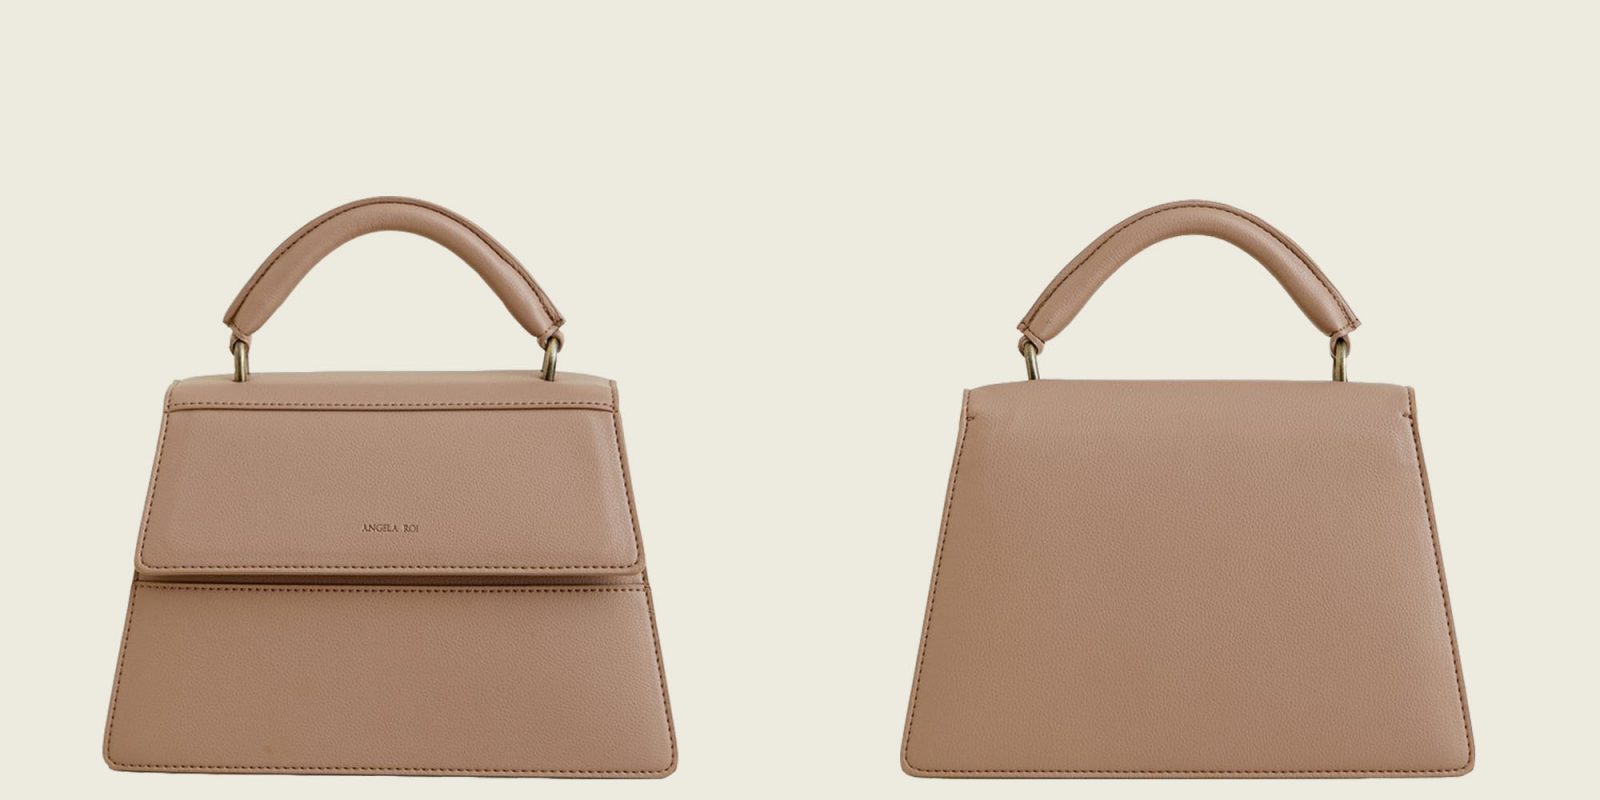 30 Sustainable Handbags We Know You'll Love - Good On You